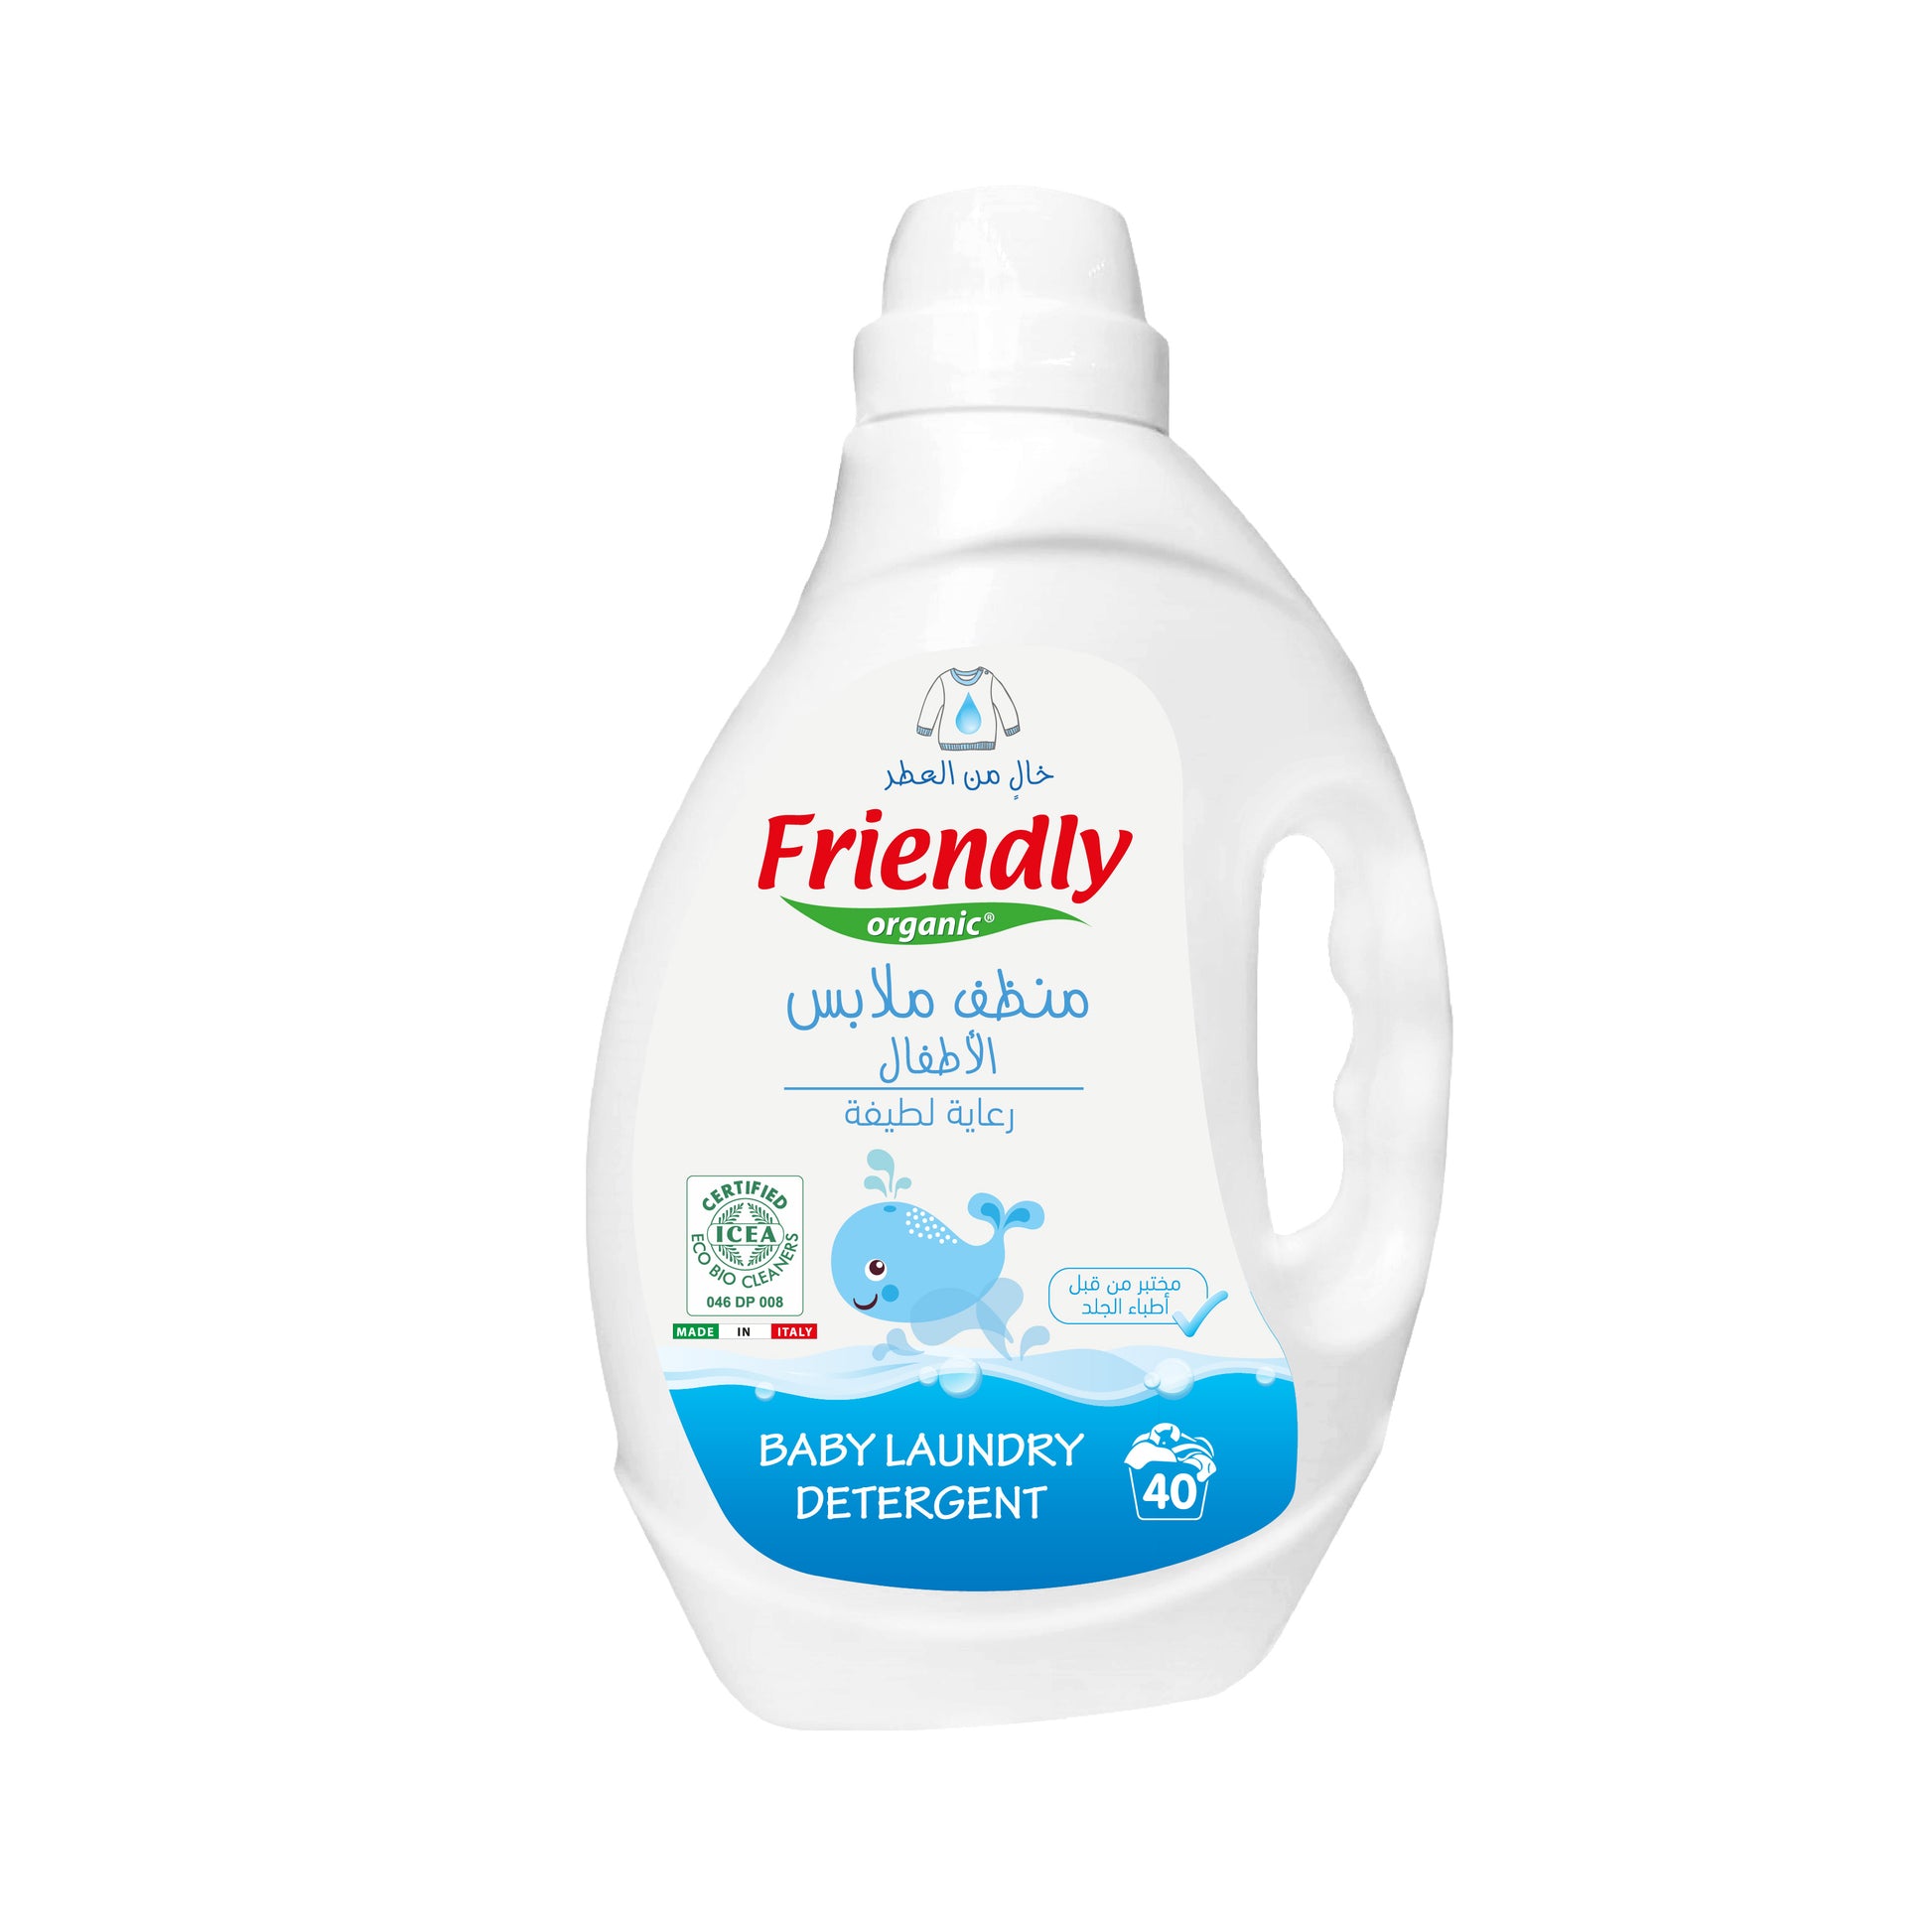 Friendly Organic Fragrance Free Baby Laundry Detergent, White